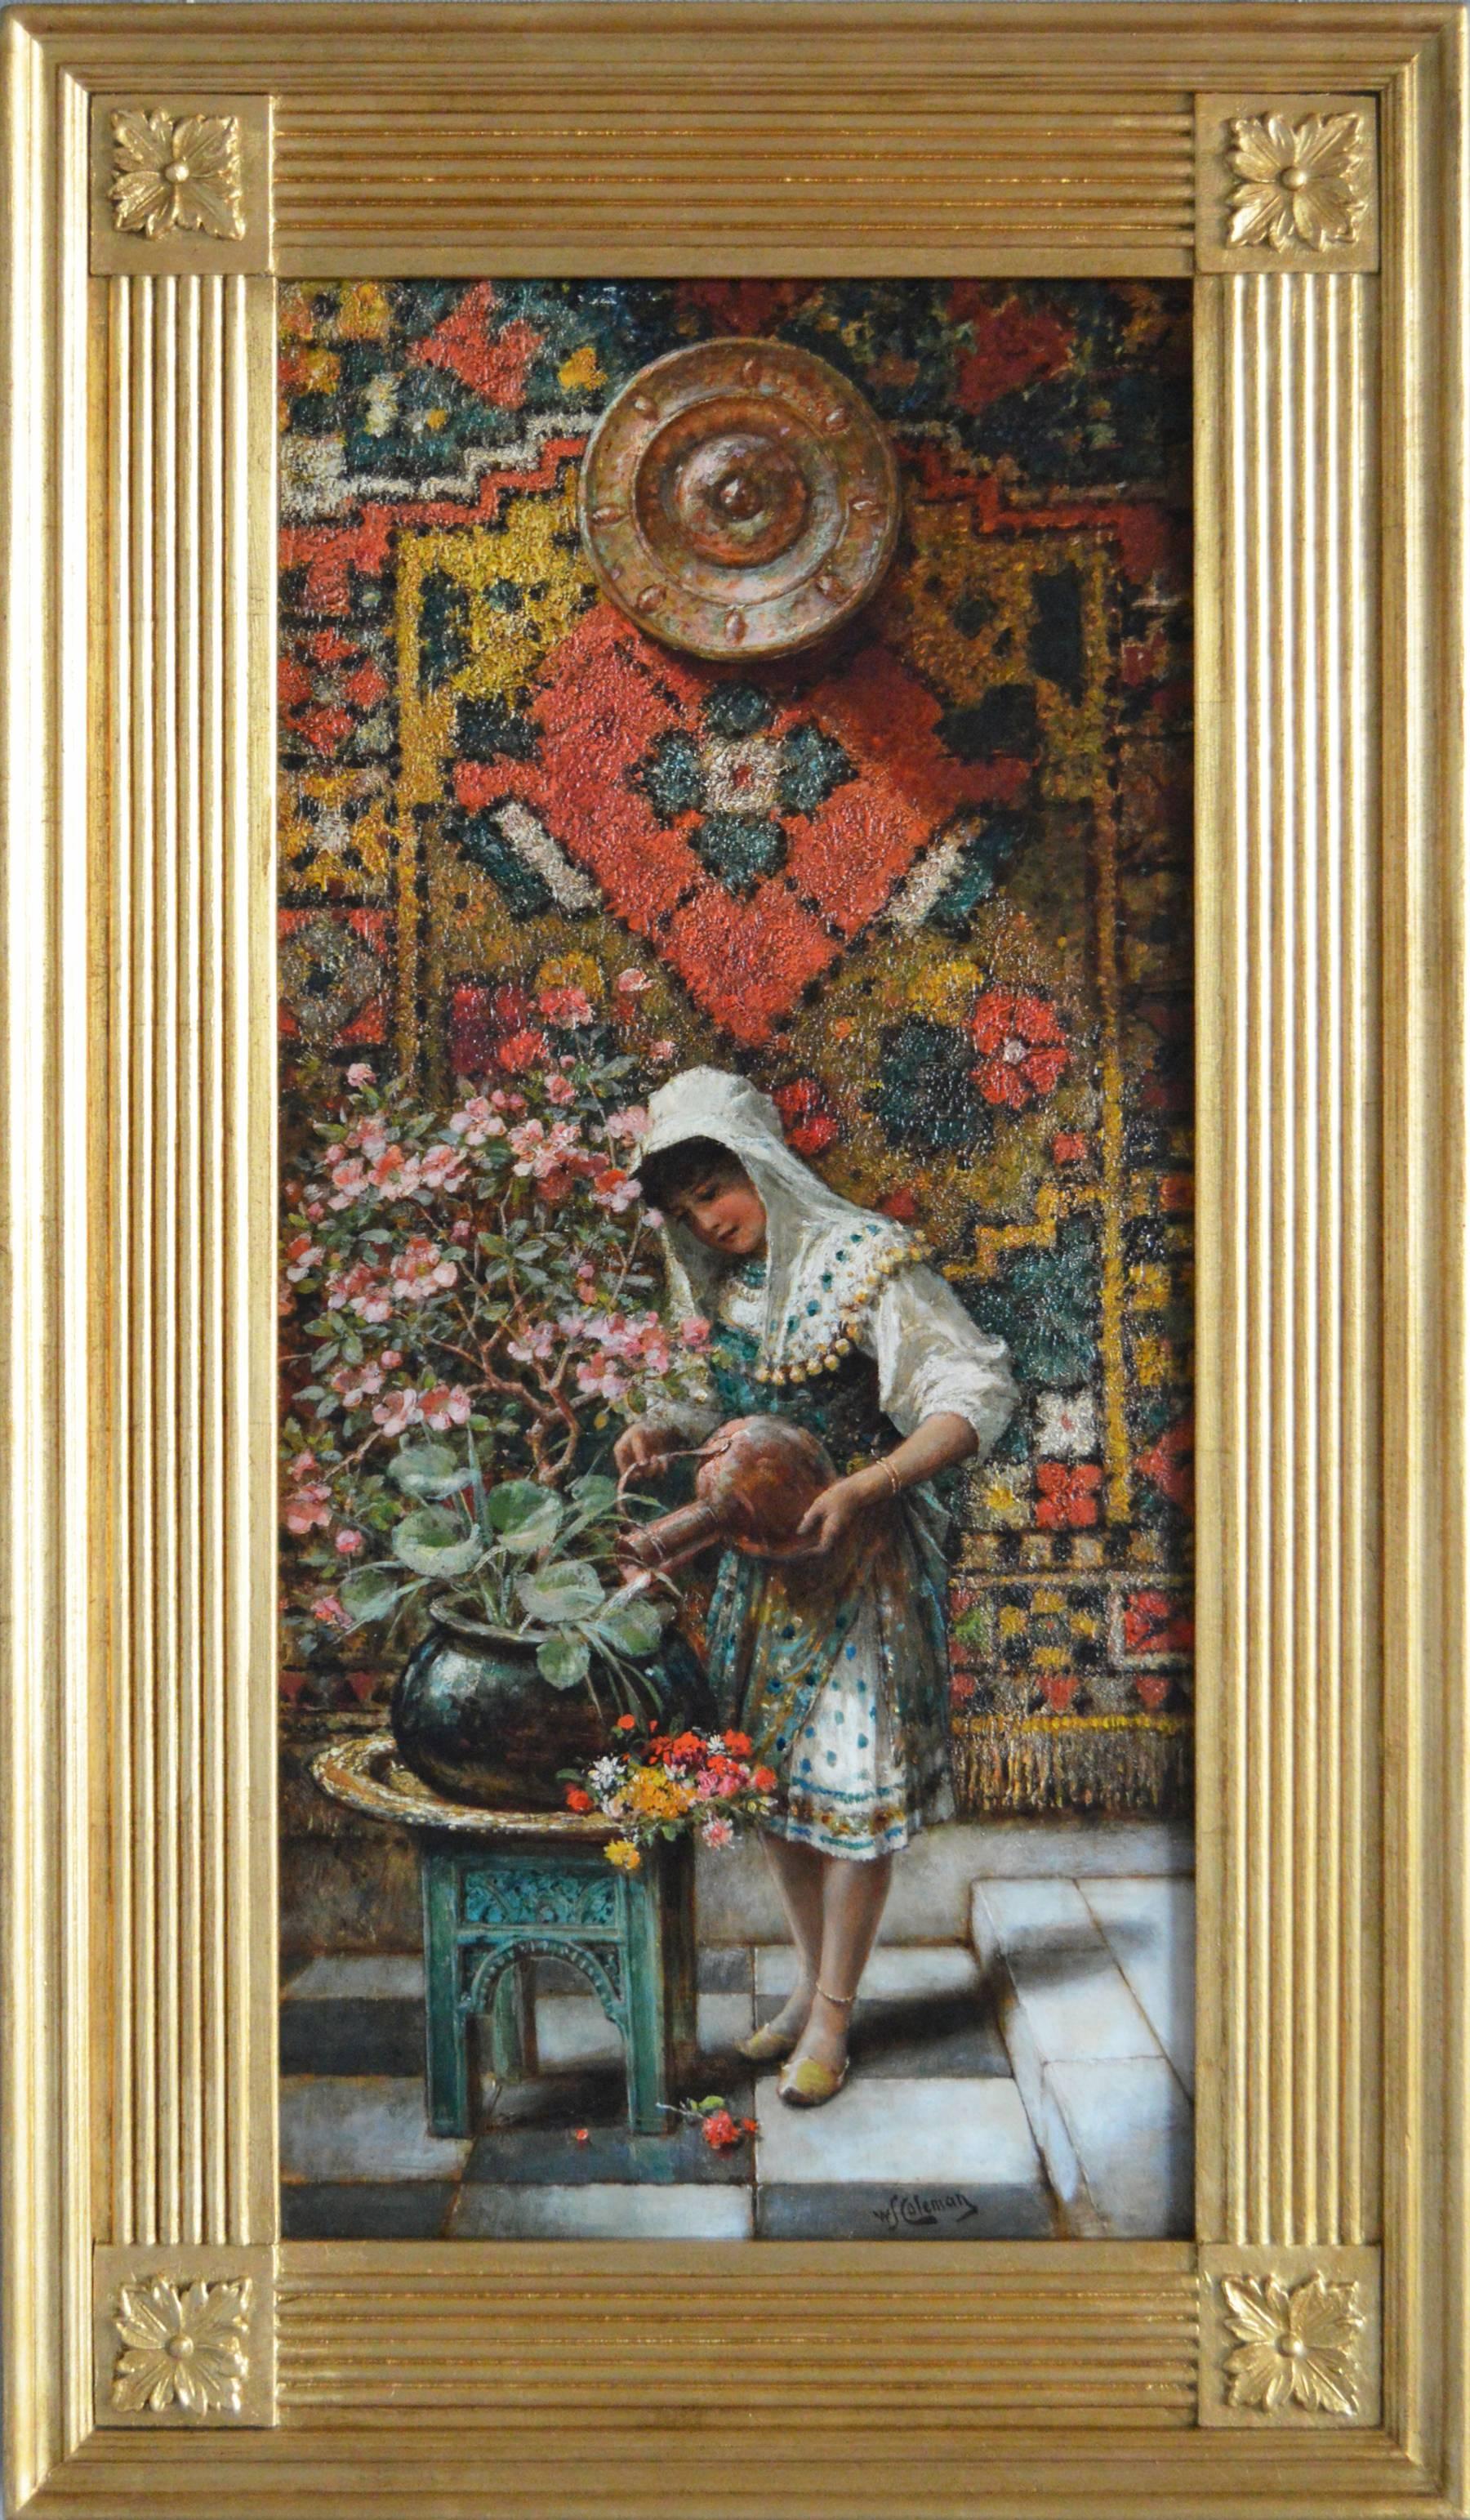 William Stephen Coleman Figurative Painting - Watering the Flowers, oil on canvas